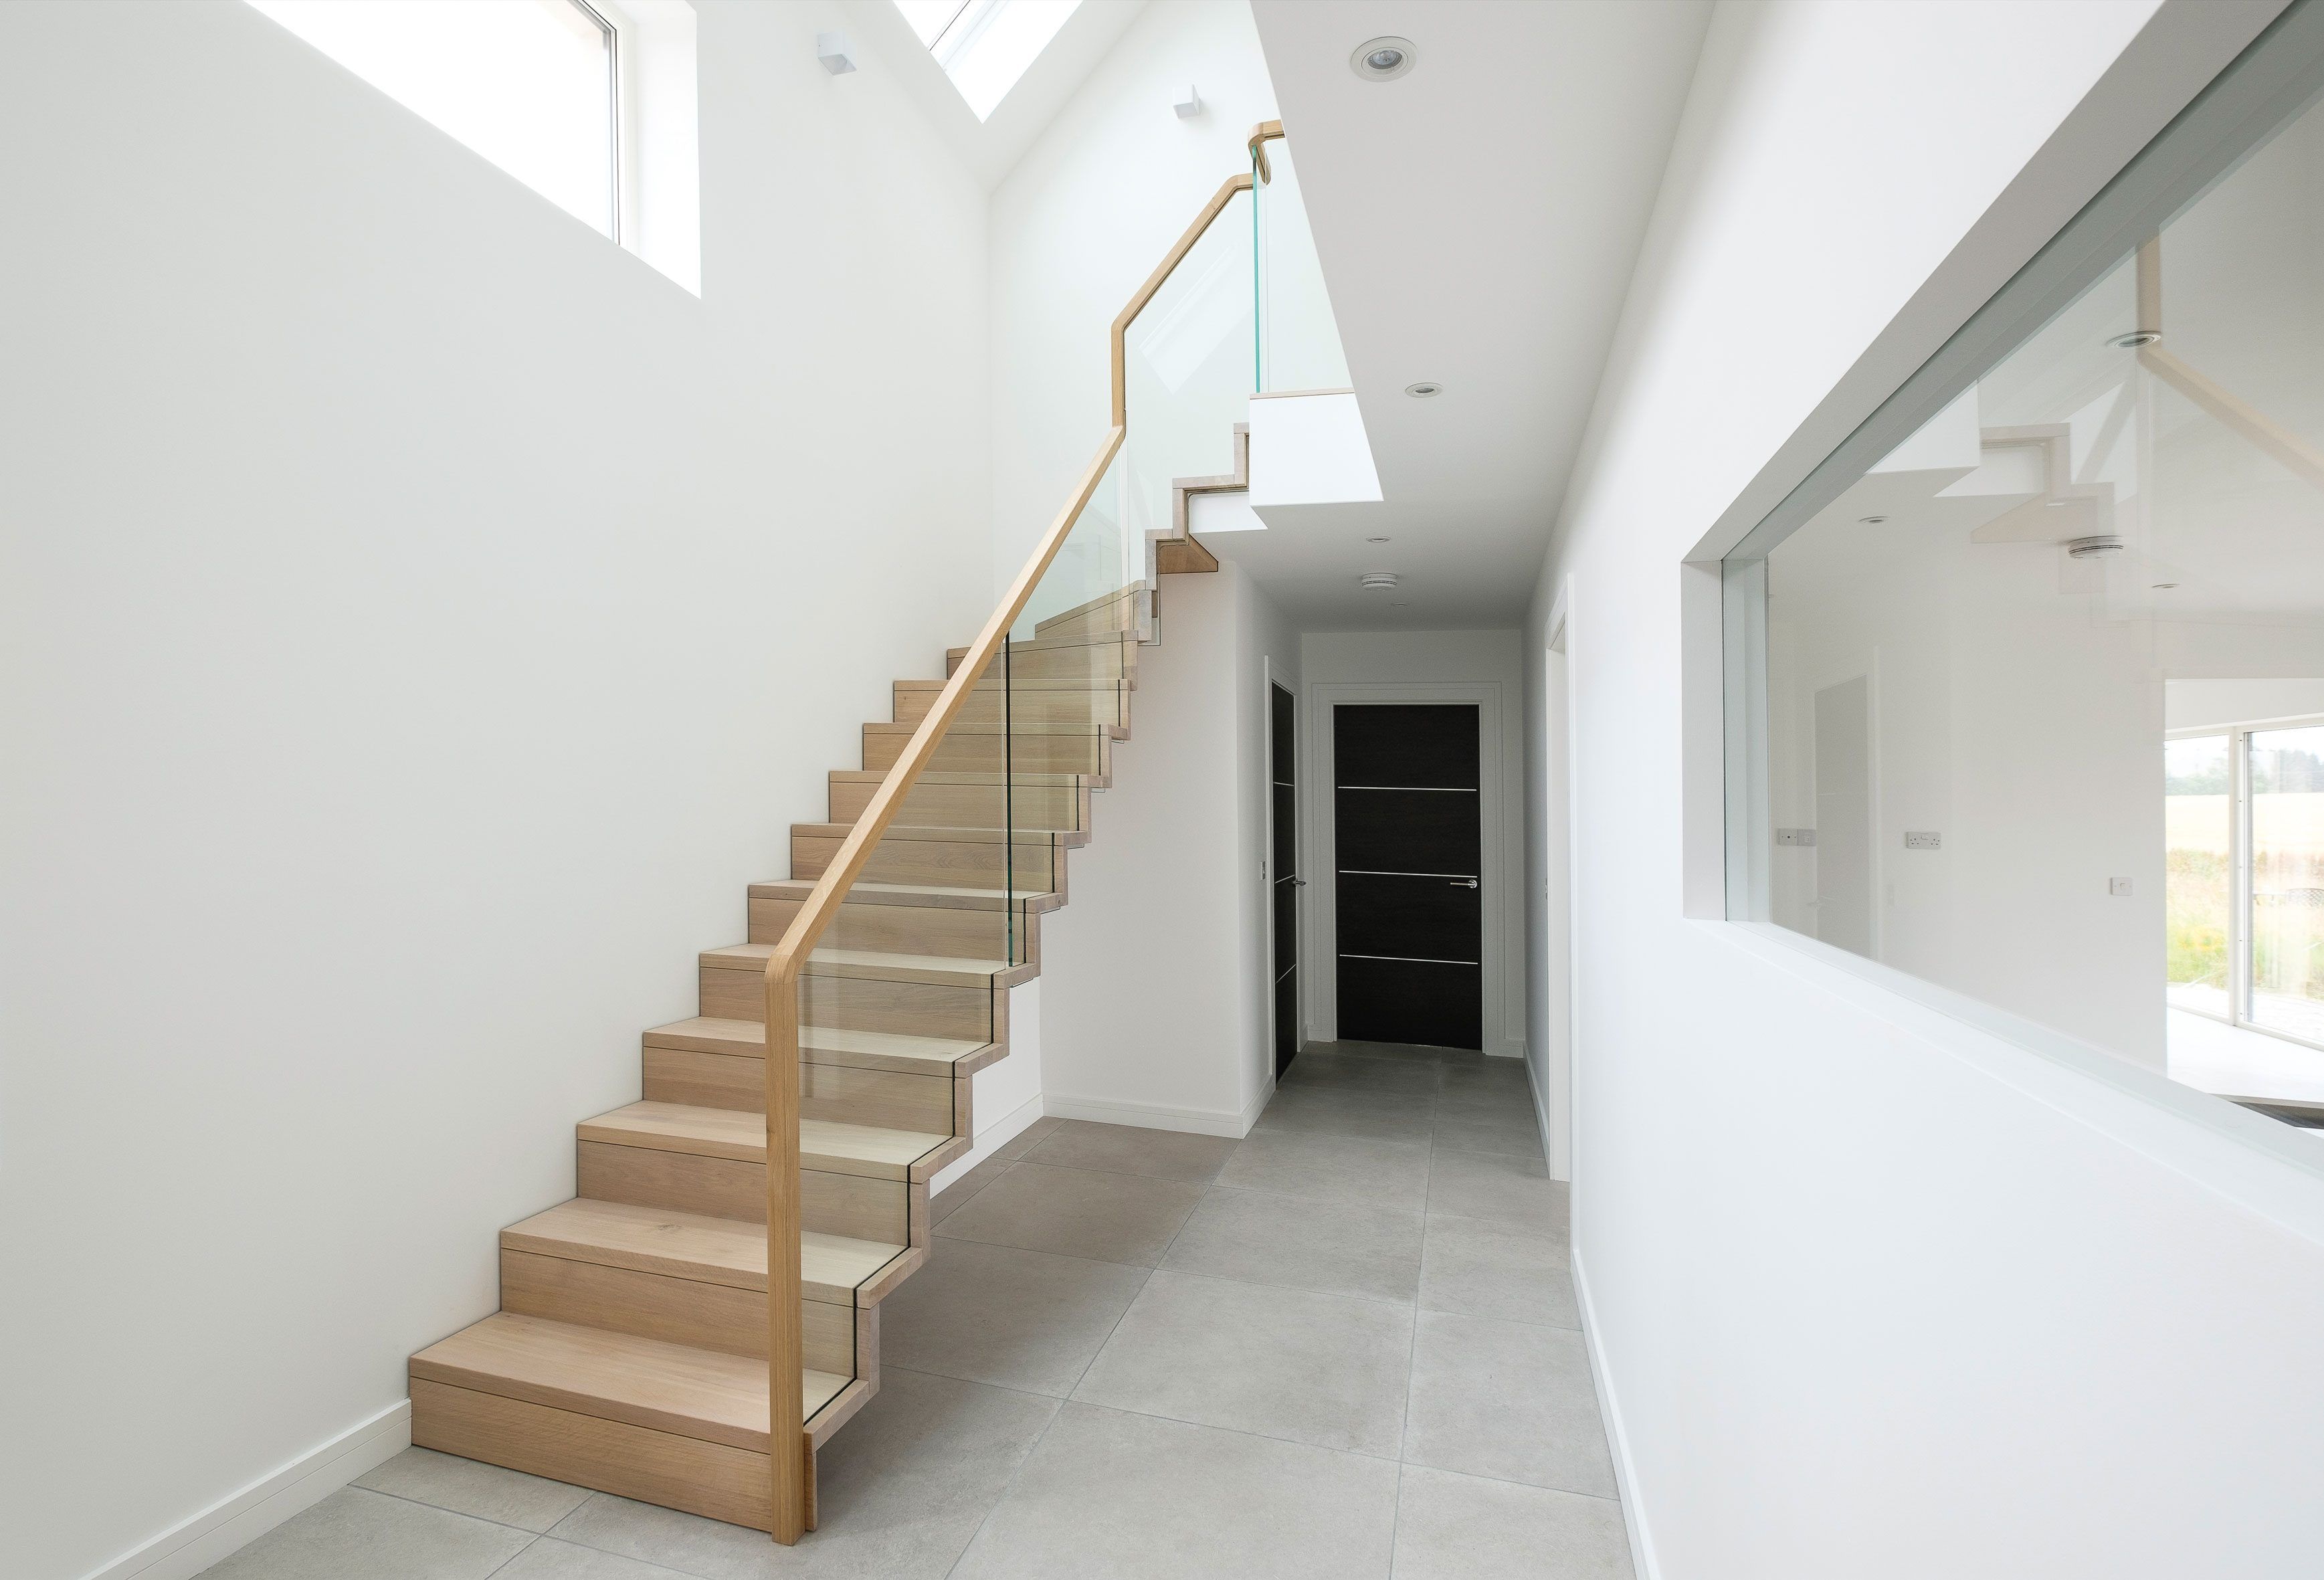 Contemporary bespoke oak staircase with glass balustrade in large, minimal, white hall with grey tiles floor and black doors.